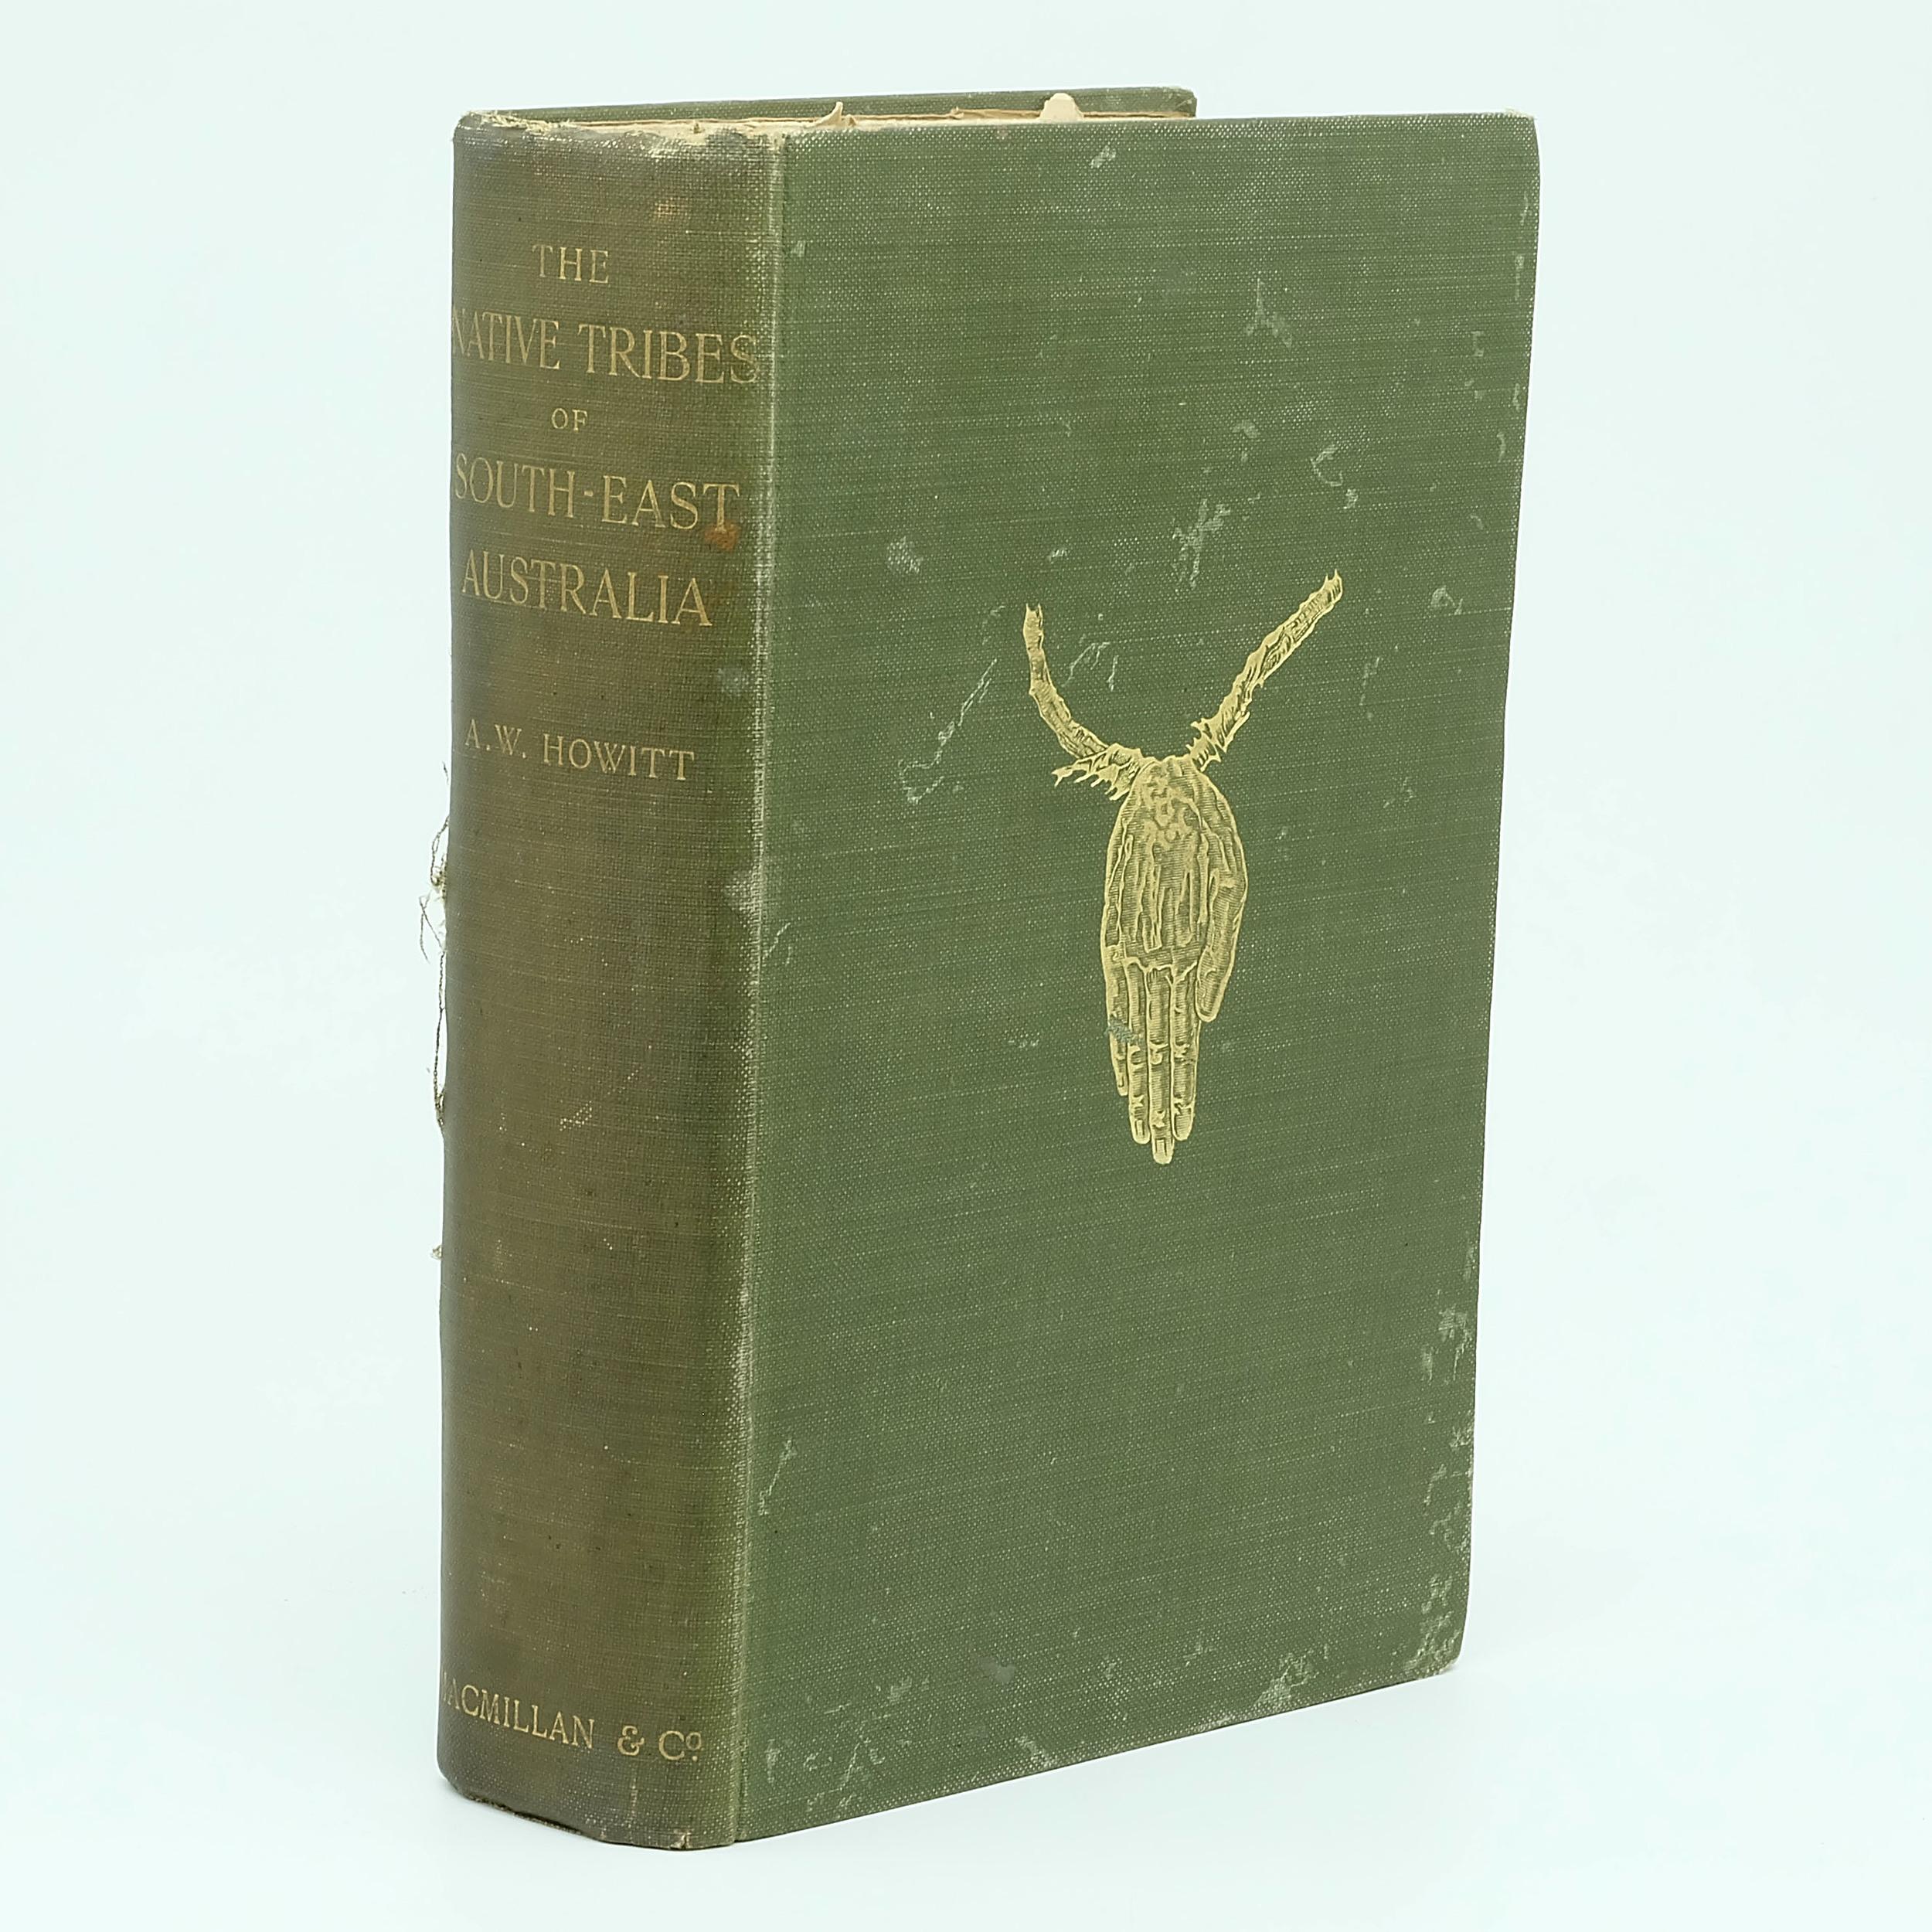 'A W Howitt The Native Tribes of South East Australia Macmillian and Co London 1904'